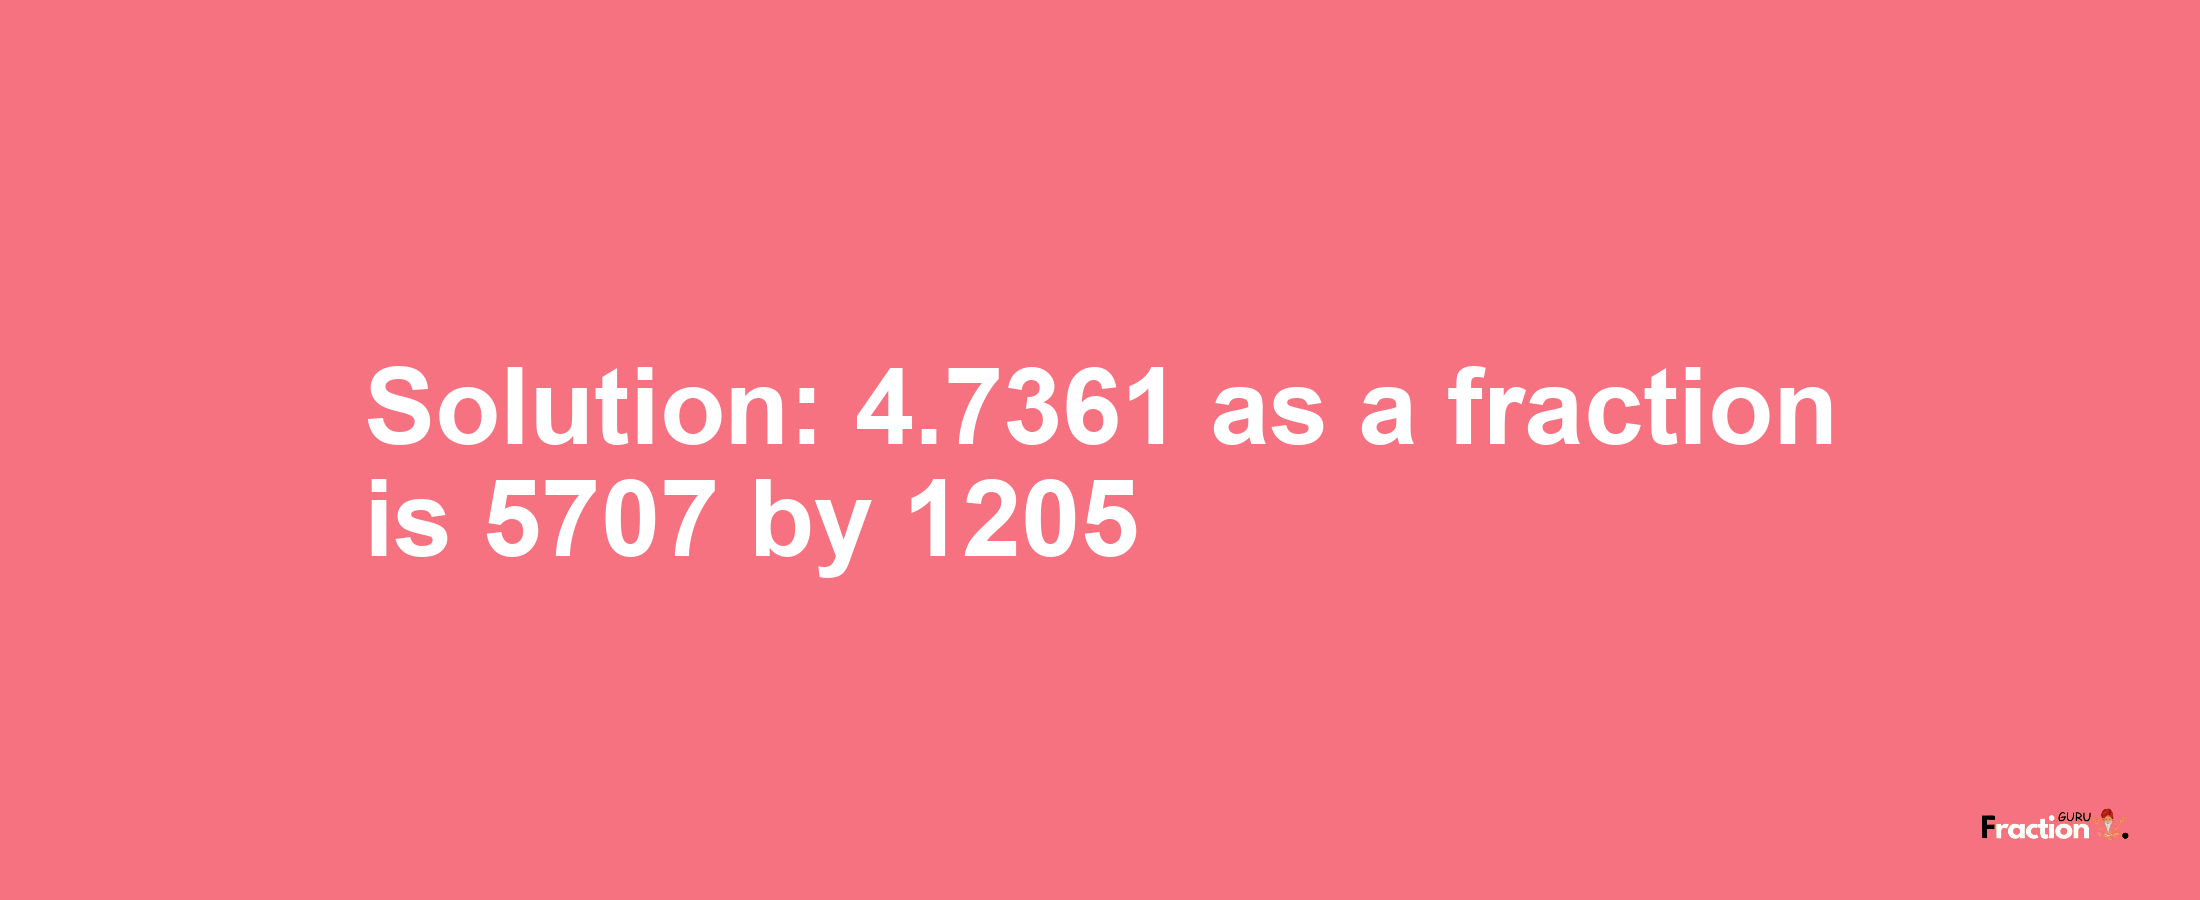 Solution:4.7361 as a fraction is 5707/1205